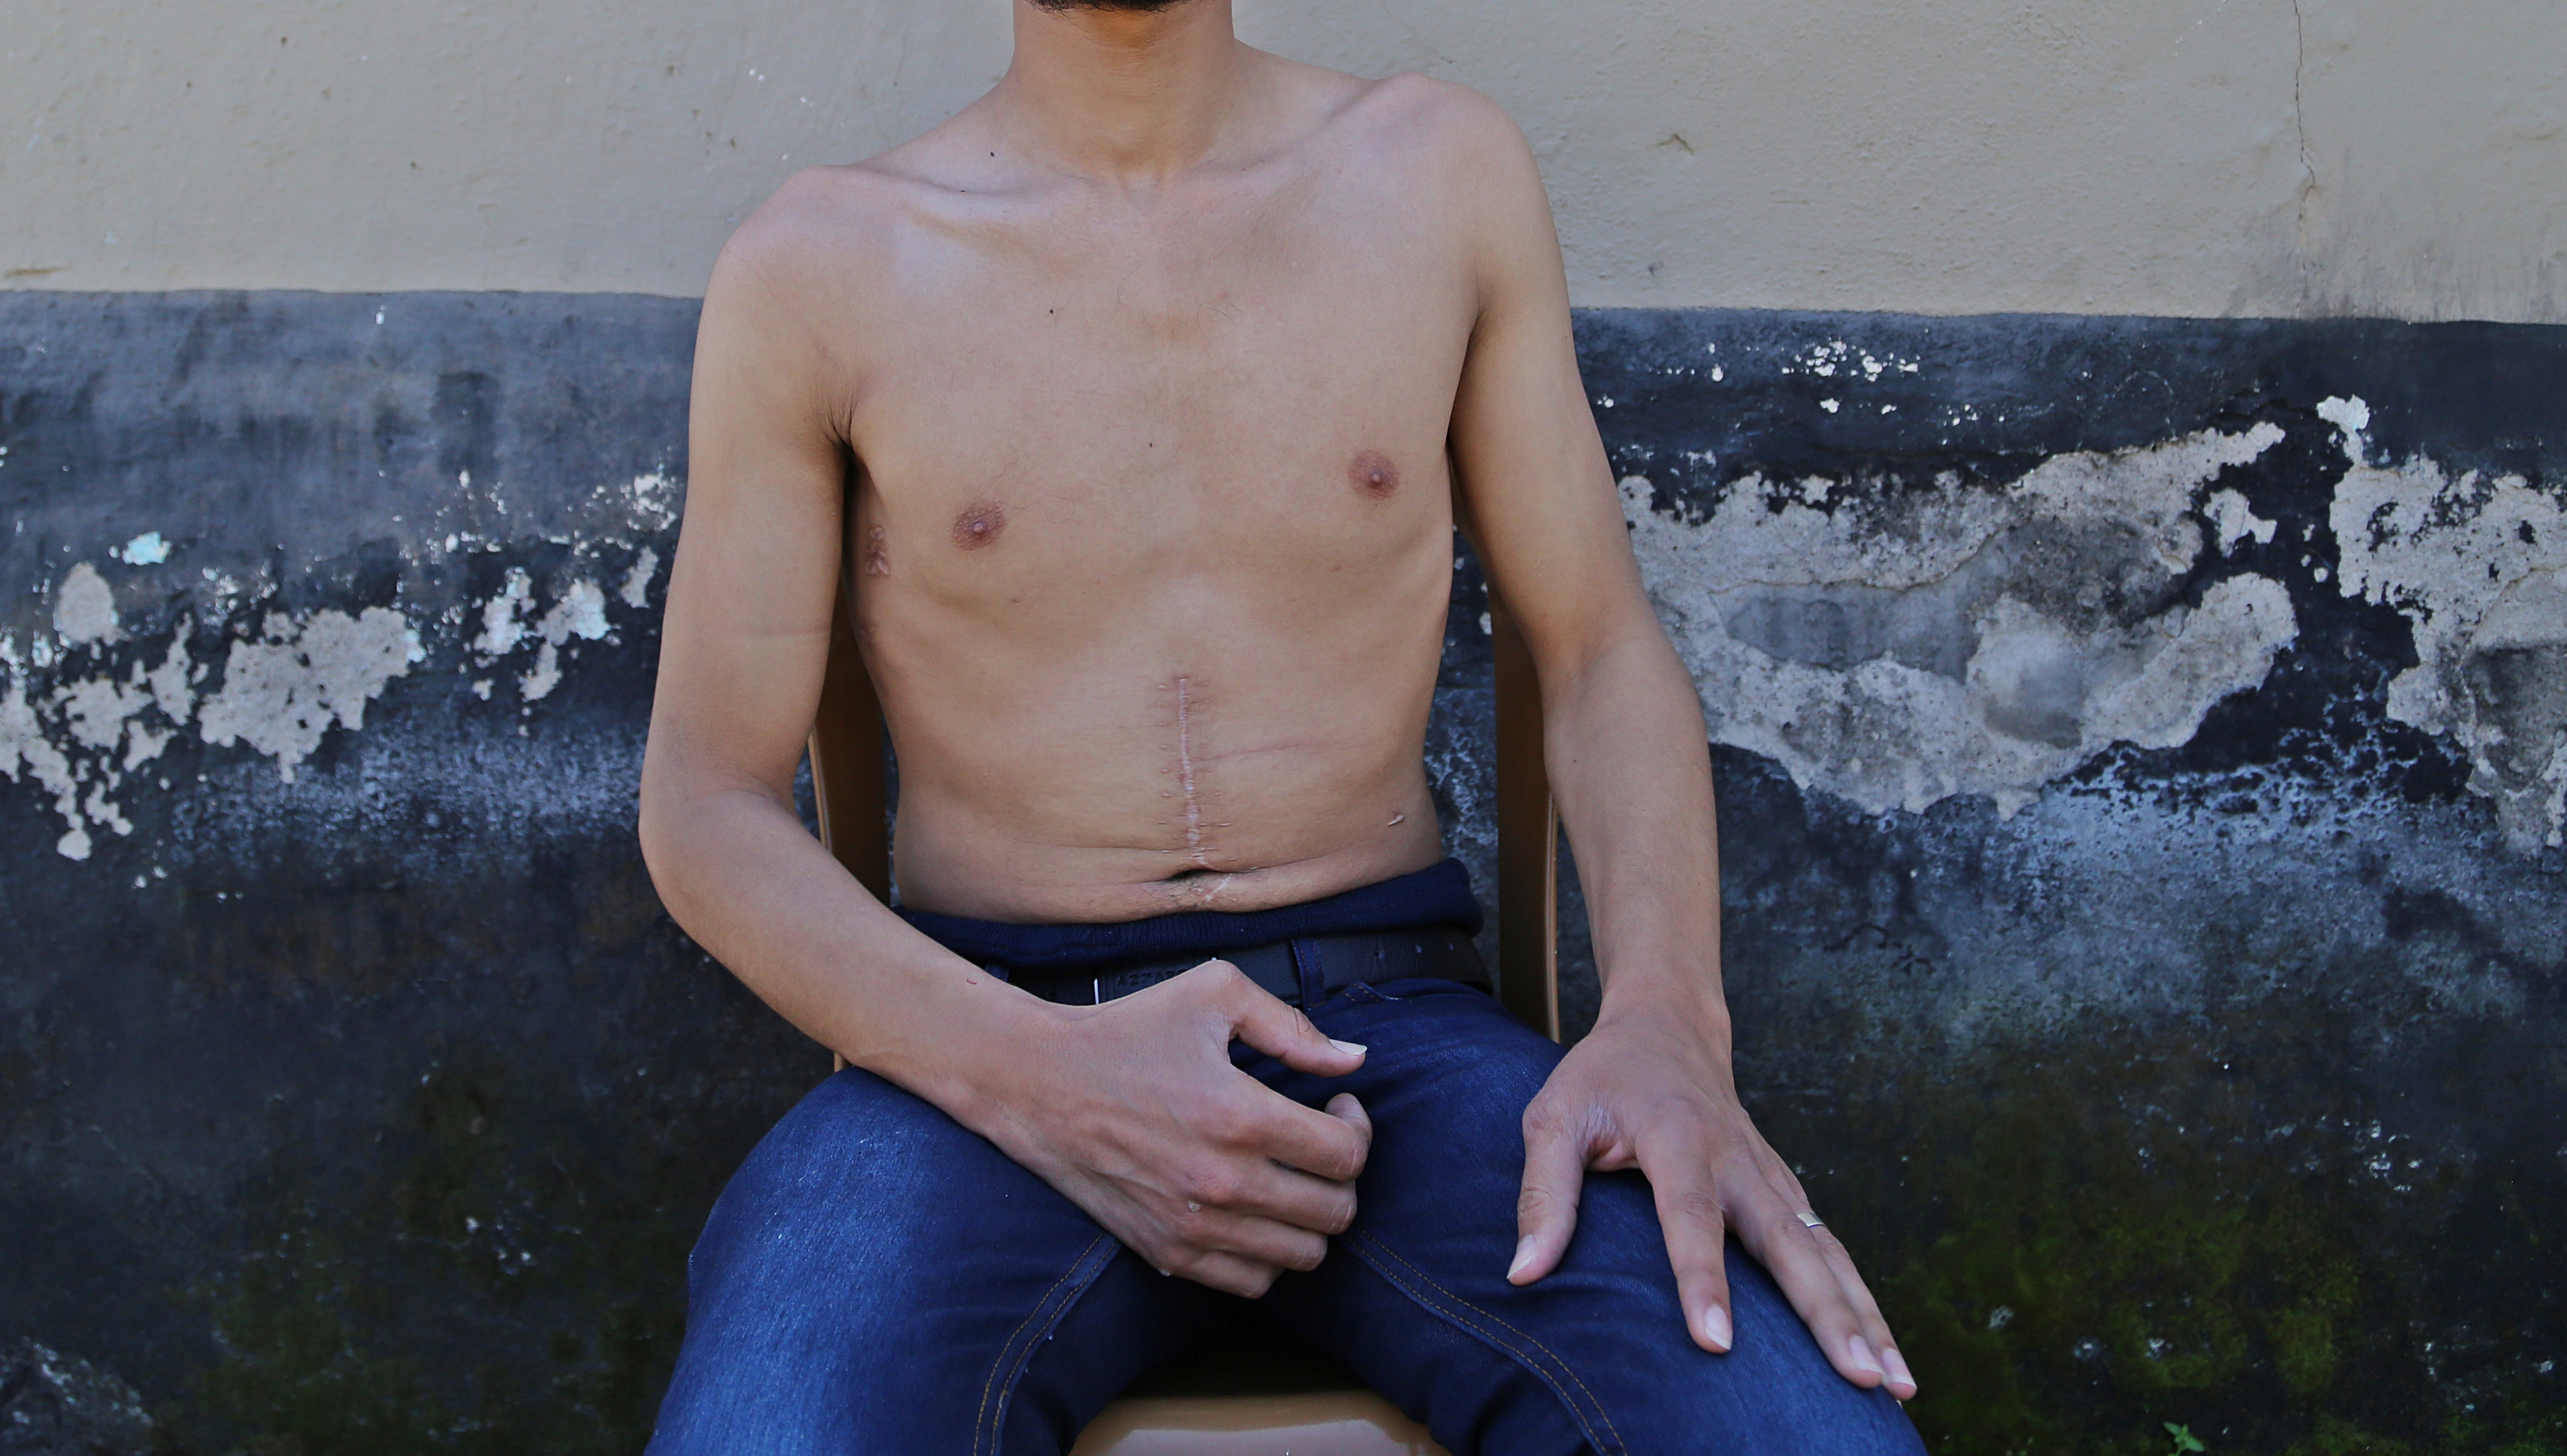 A man who says he was tortured in a Syrian prison is pictured in Hatay, Turkey, on March 29, 2014 (Cem Genco—Anadolu Agency/Getty Images)